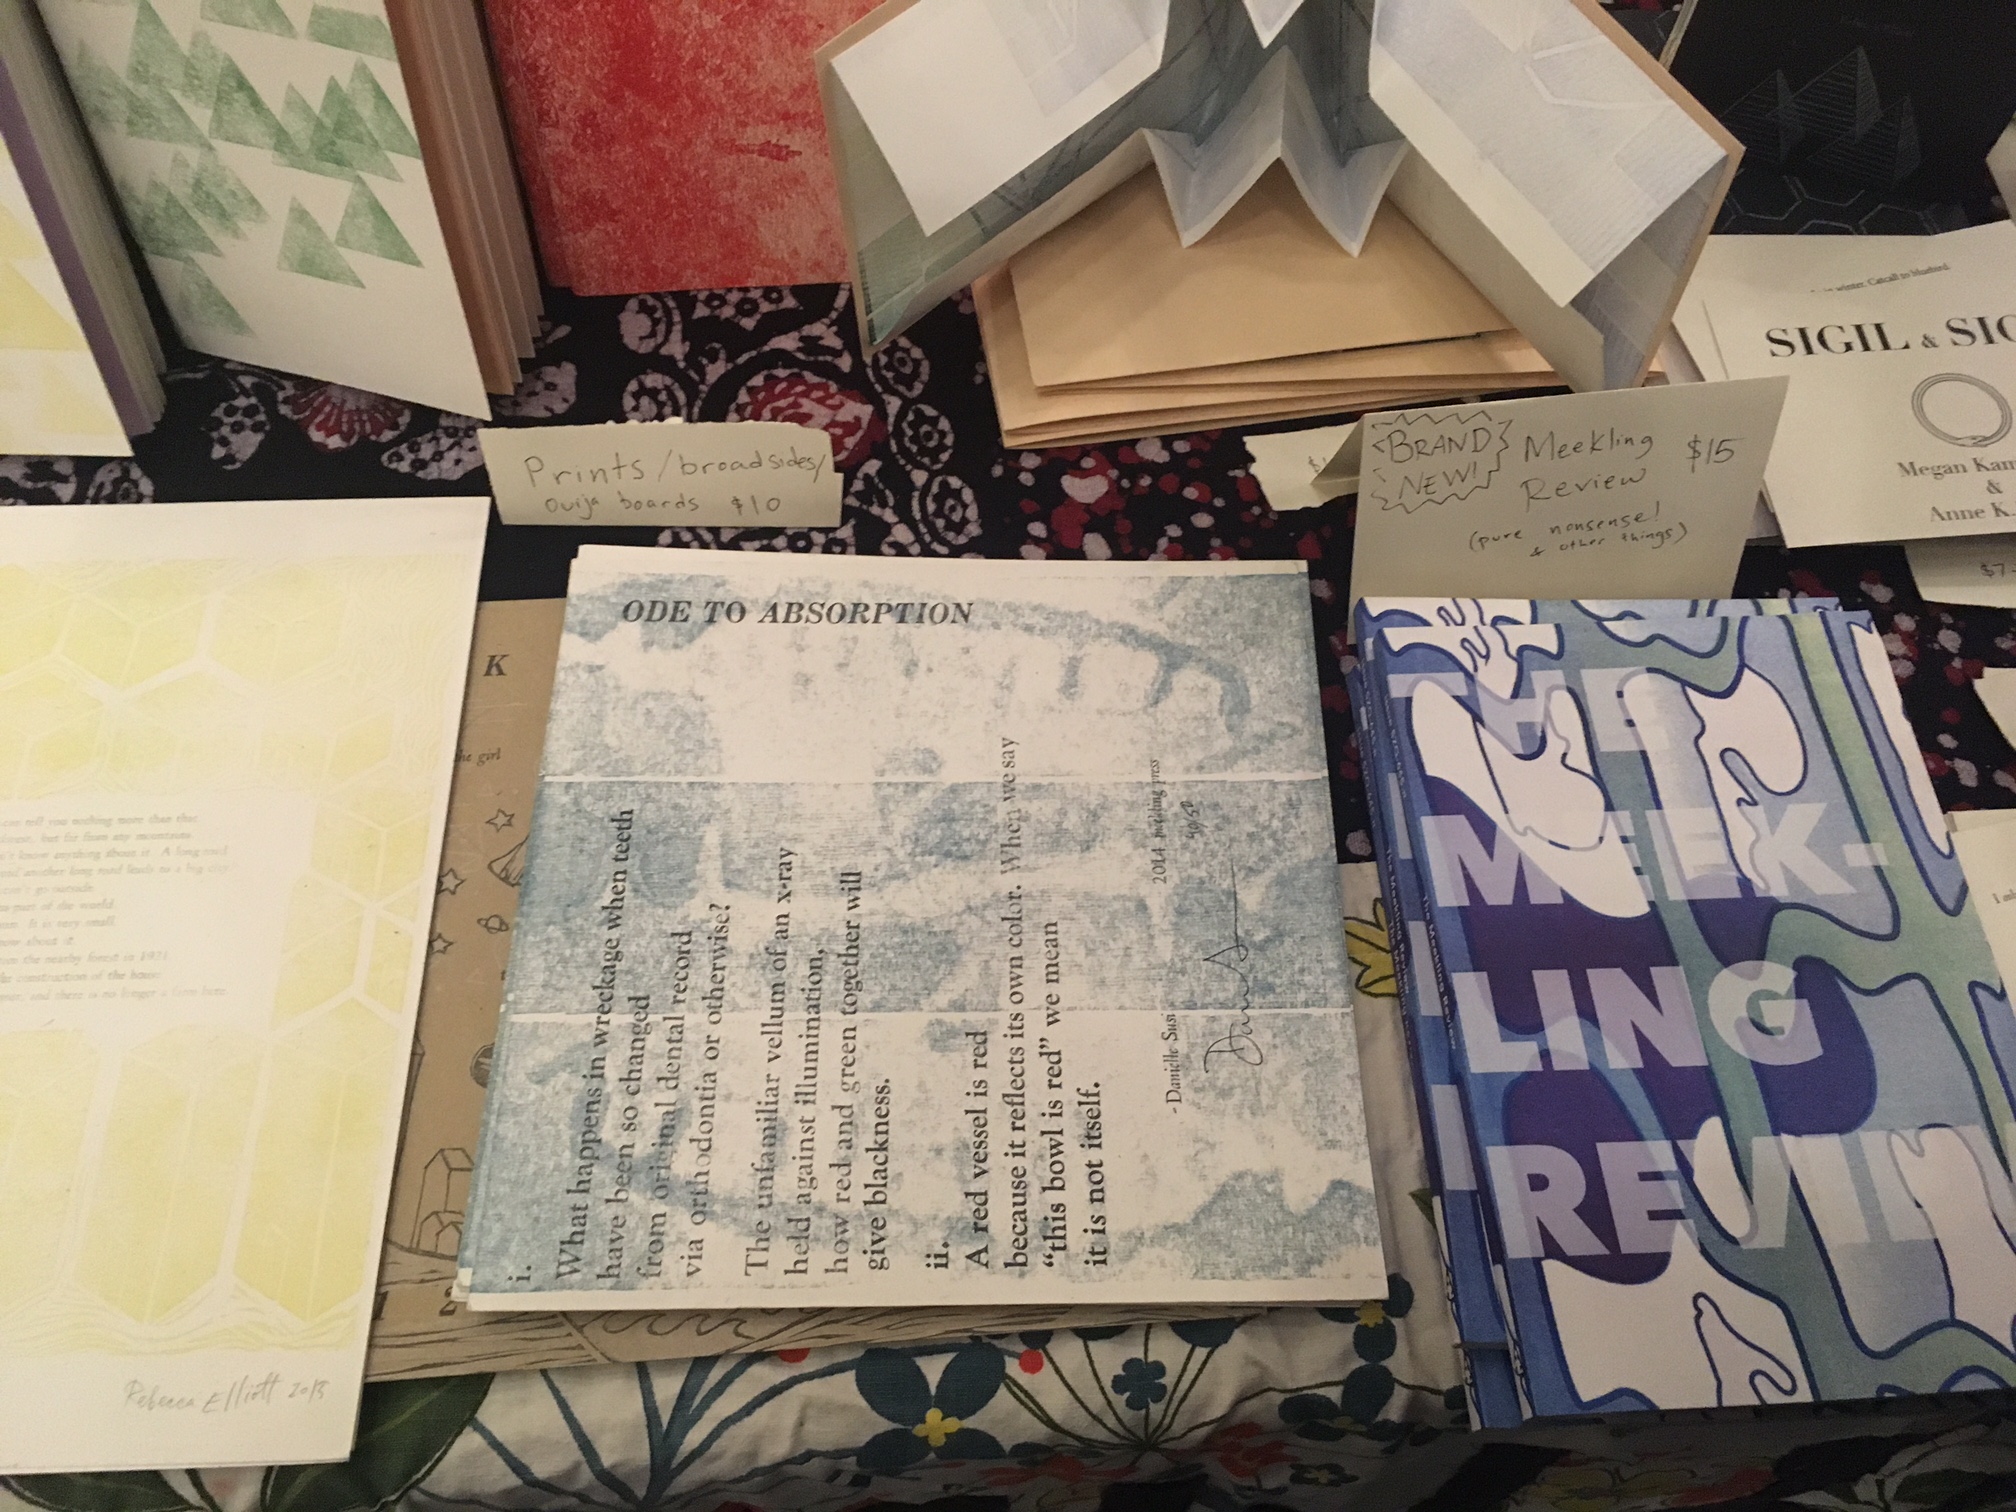 Items from the Meekling Press table at the Chicago Art Book Fair.